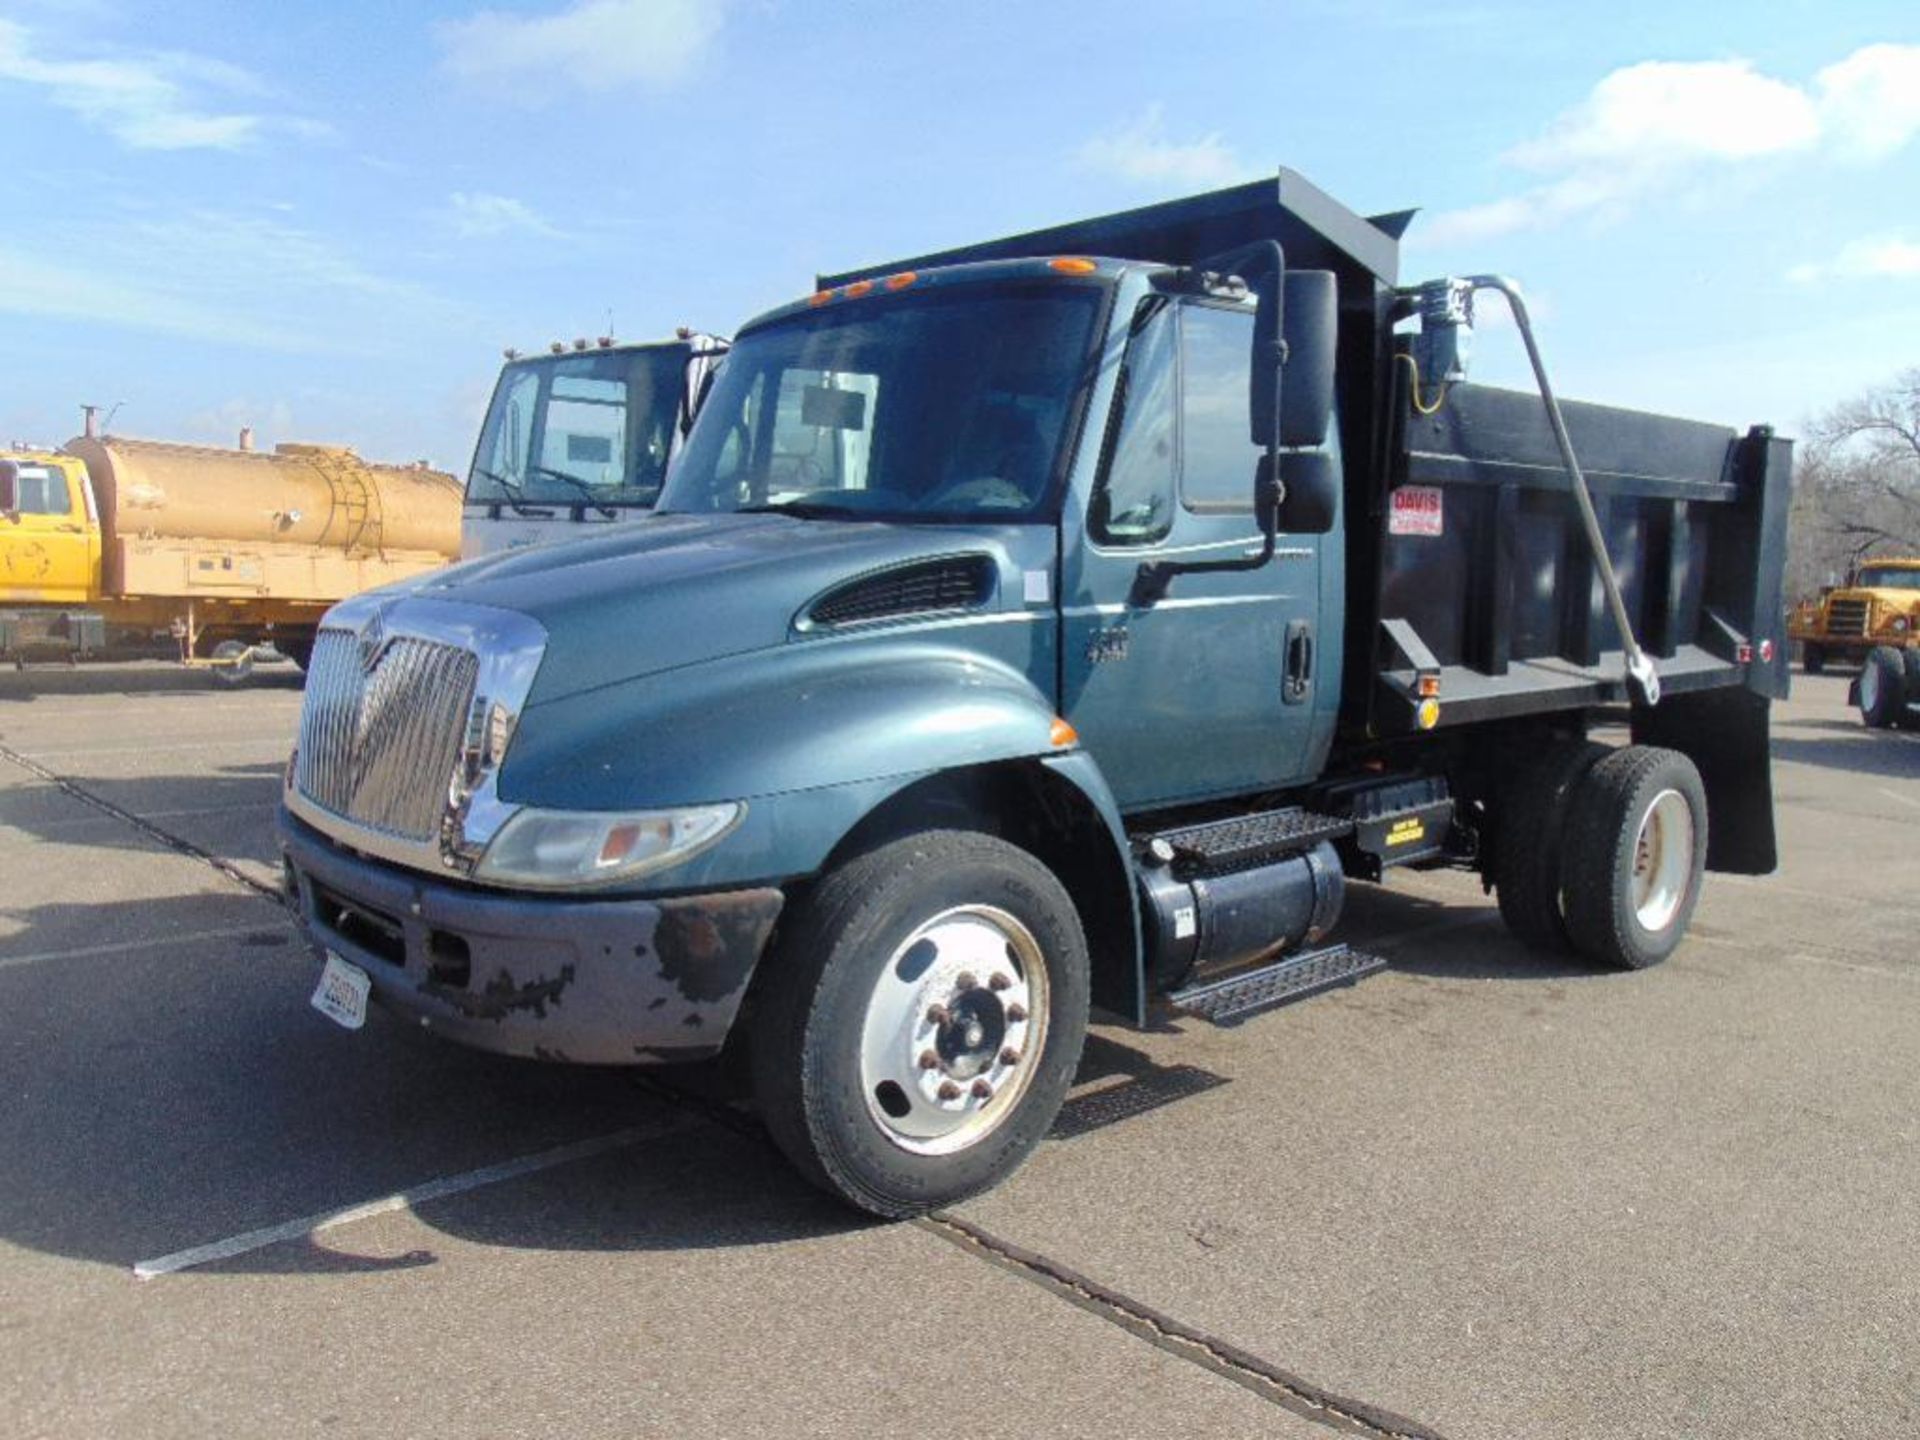 2006 IHC 4300 s/a Dump Truck s/n 1htmmaam07h453143, dt466 eng, auto trans, od reads 76237 miles, new - Image 7 of 10